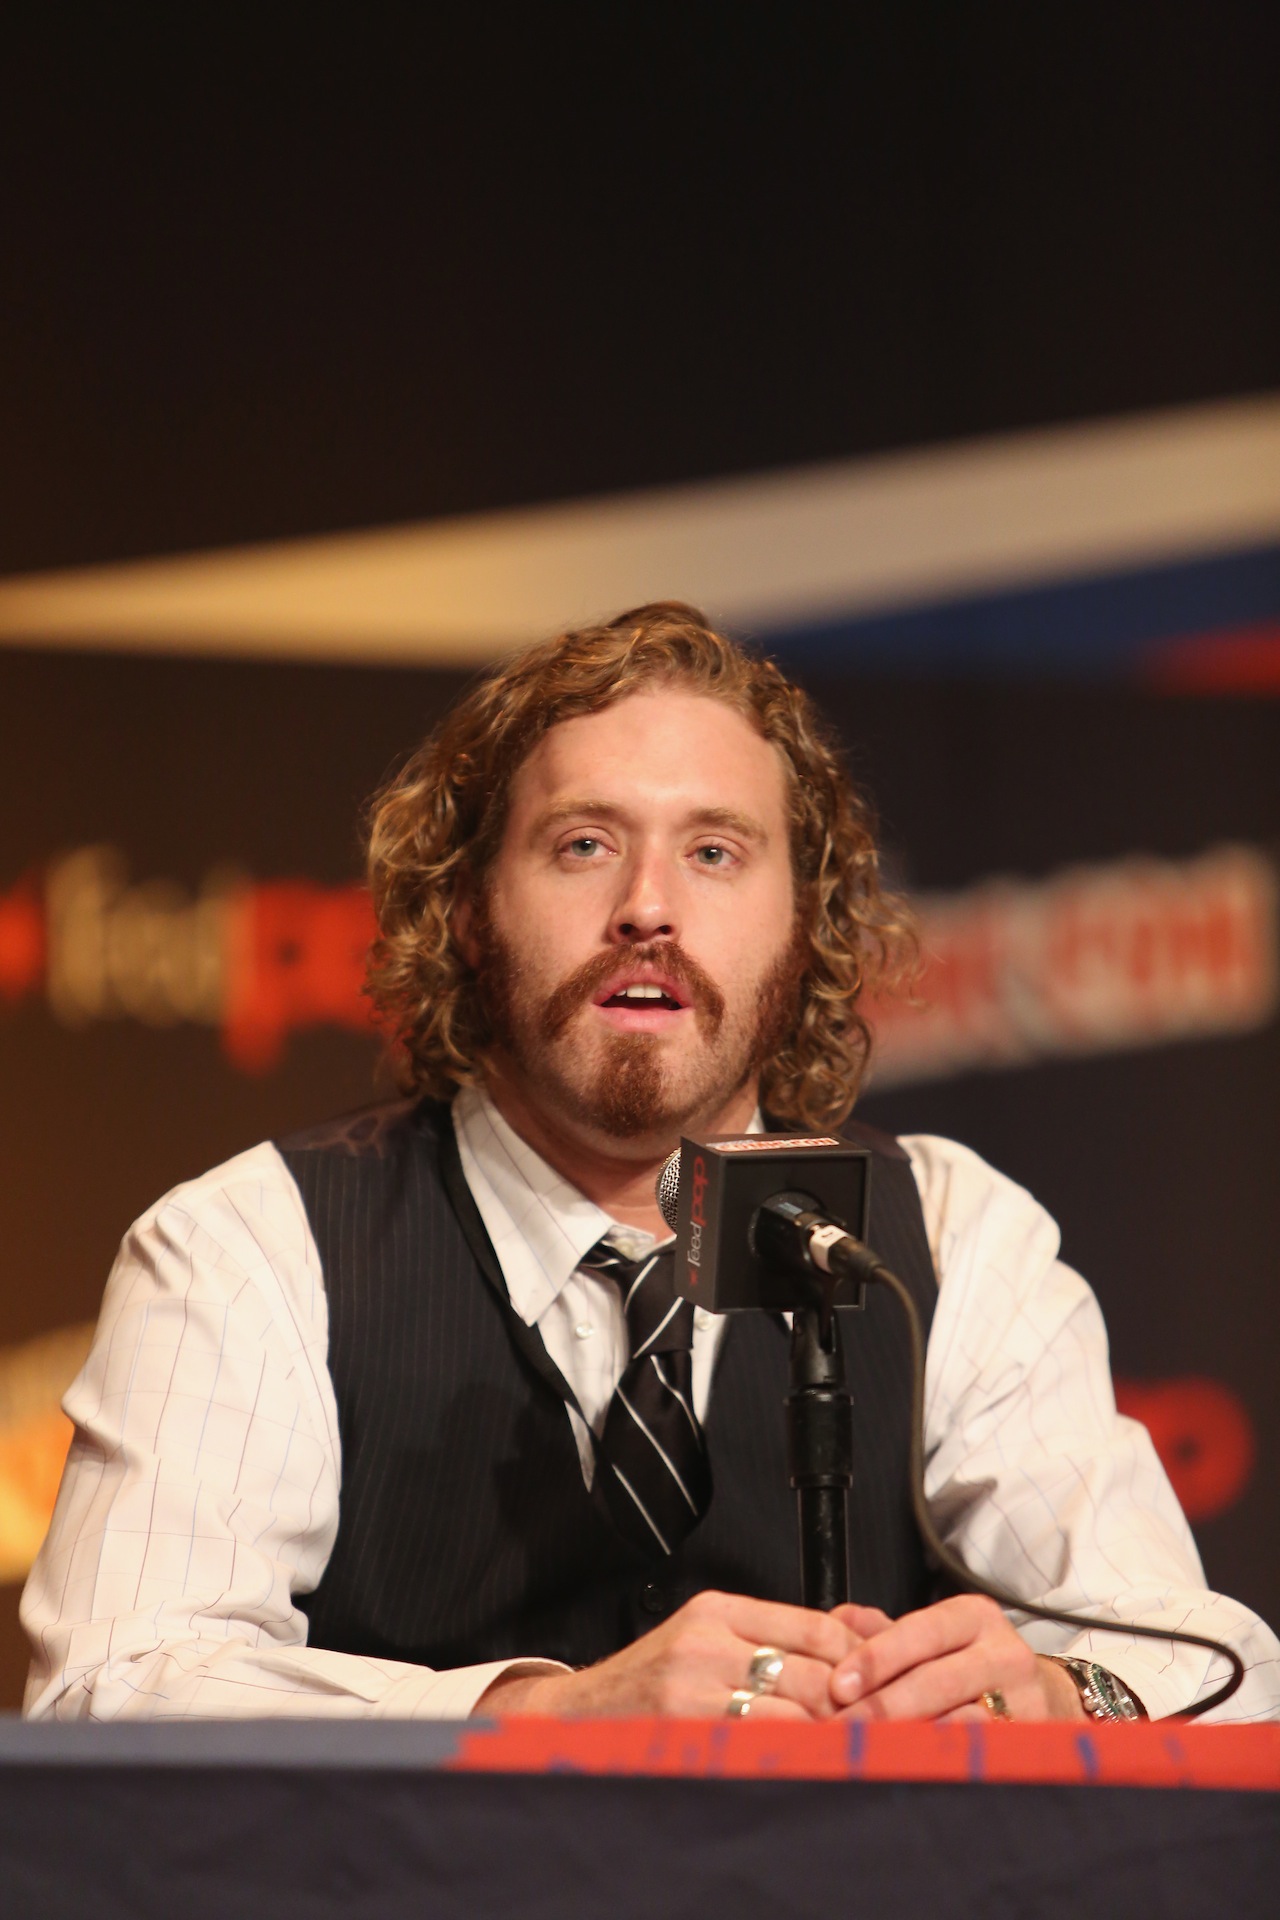 NEW YORK, NY - OCTOBER 09:  Actor T.J. Miller attends Walt Disney Studios' 2014 New York Comic Con presentation of "Big Hero 6" at the Javits Convention Center on Thursday October 9, 2014 in New York City.  (Photo by Jason Carter Rinaldi/Getty Images for Disney) *** Local Caption *** TJ Miller